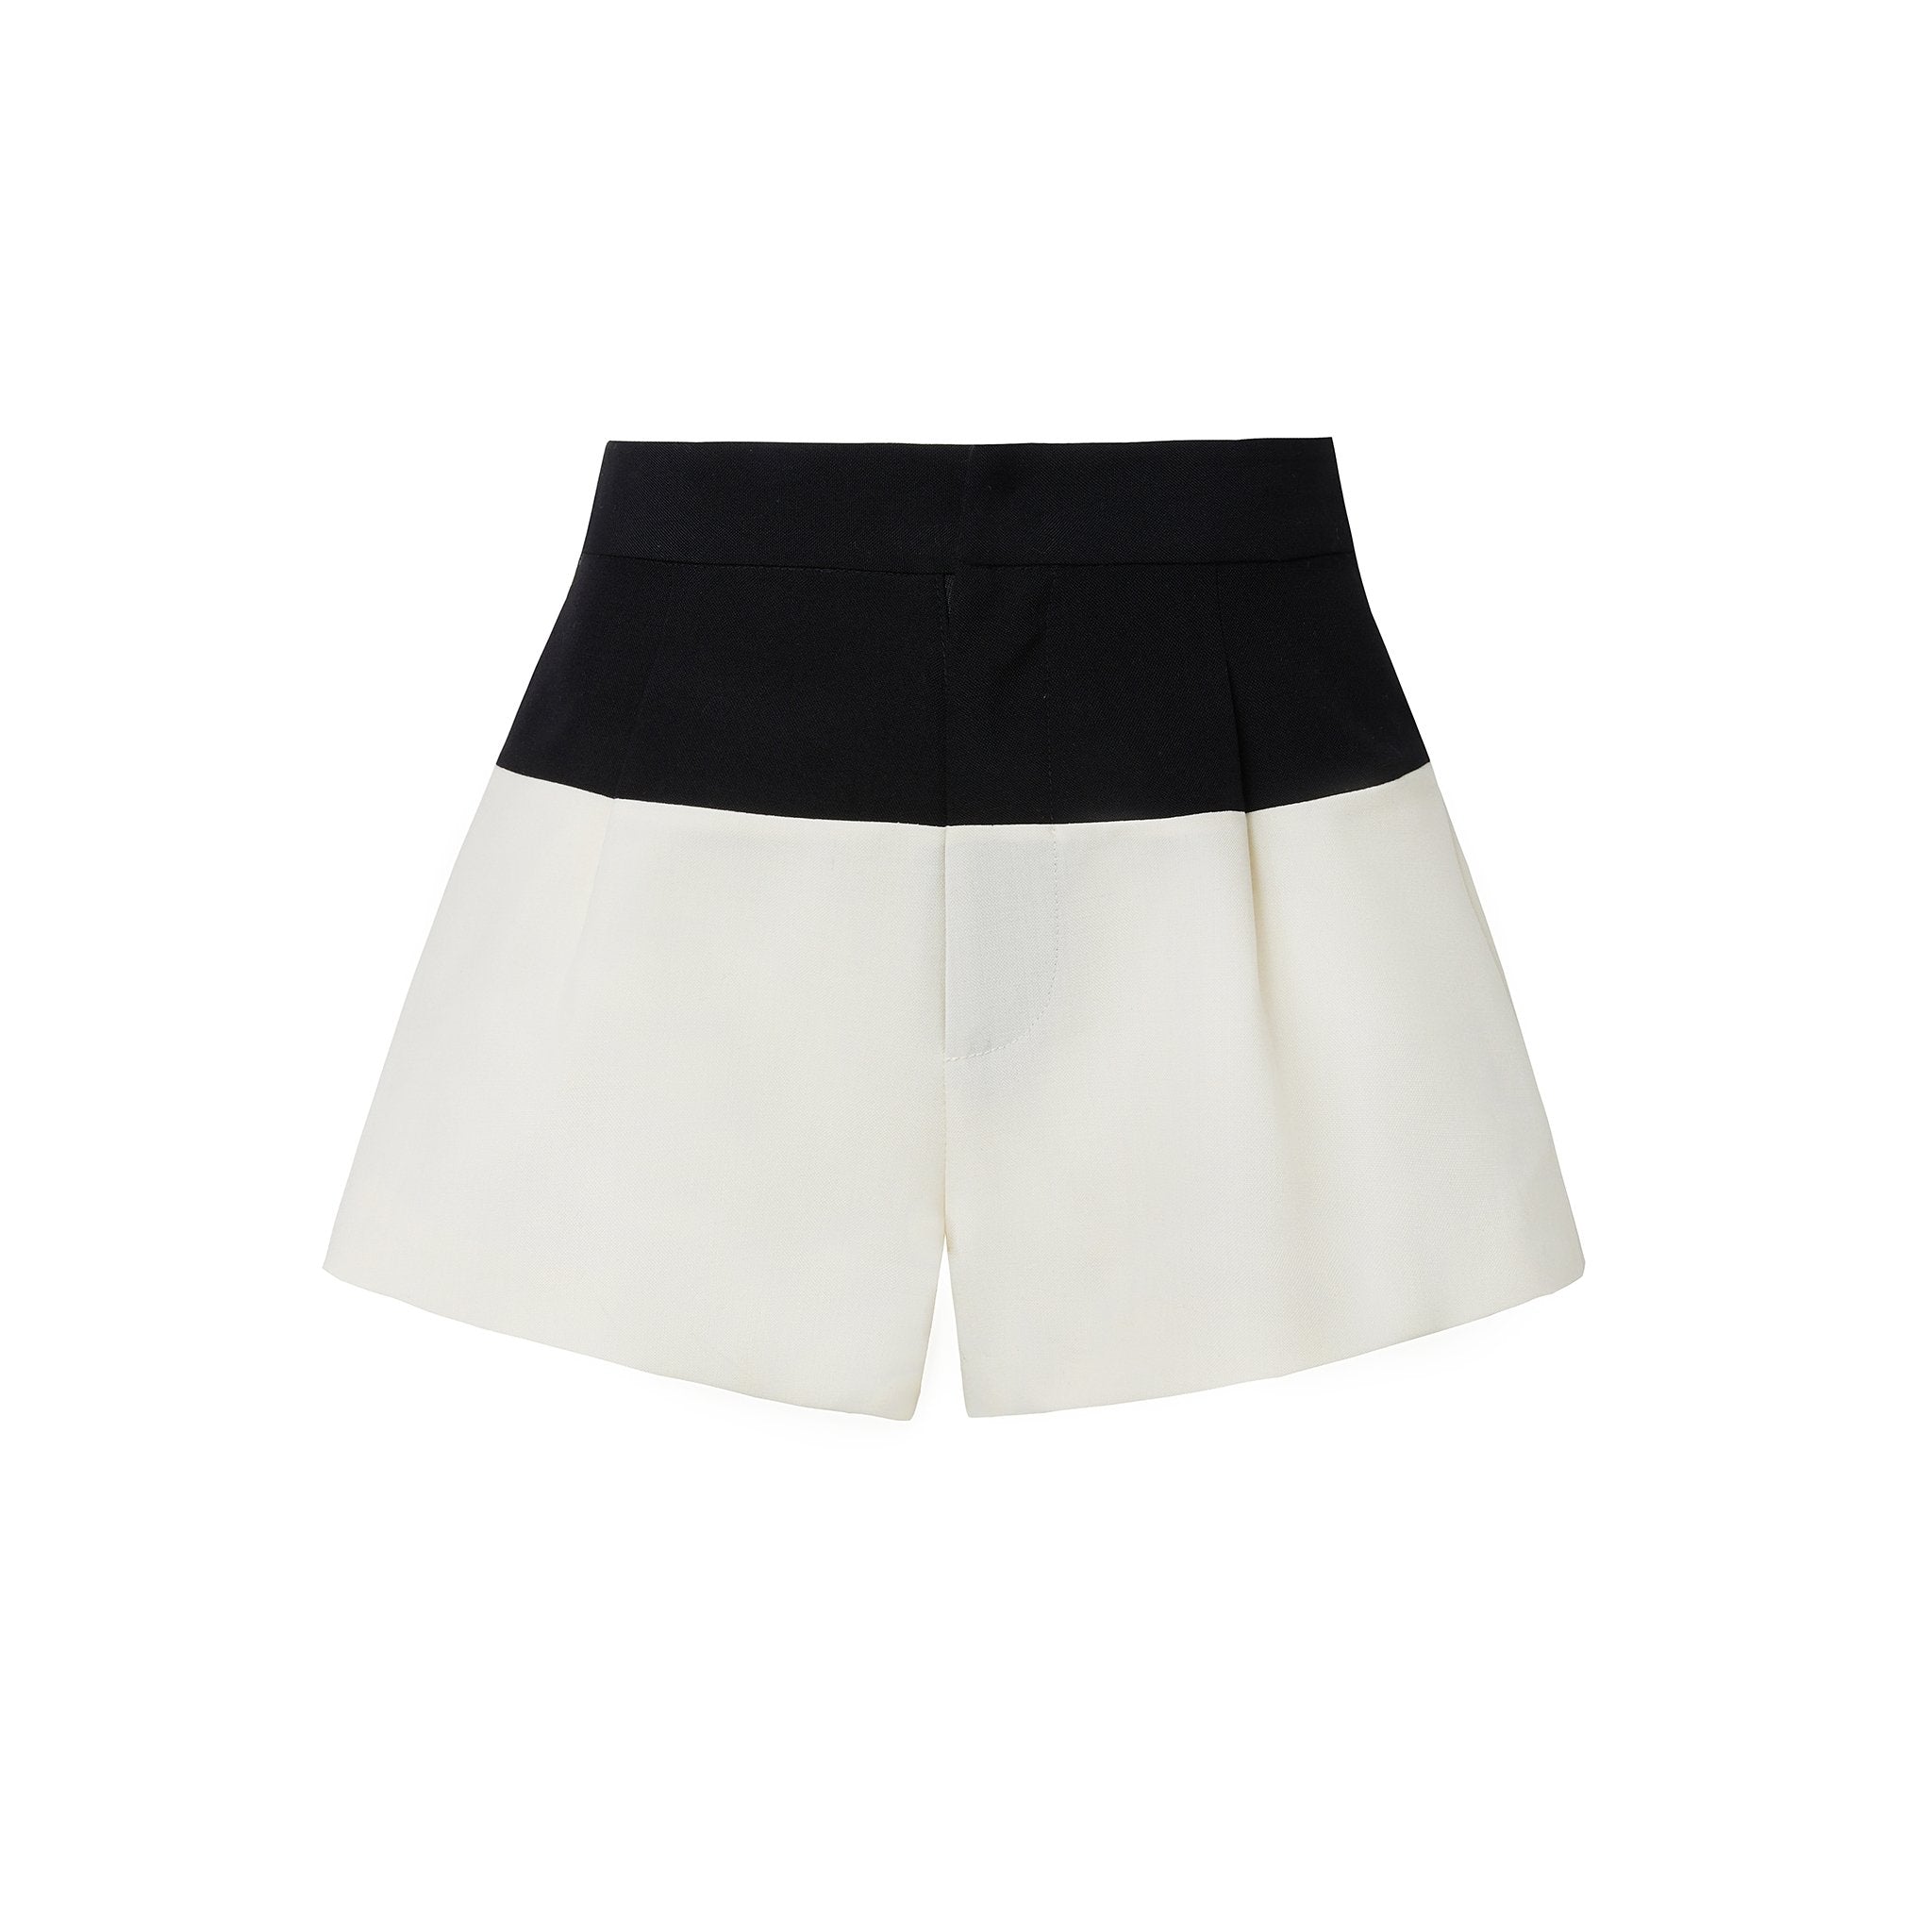 Andrea Martin Black and white color contrast hooded Skirt | MADA IN CHINA